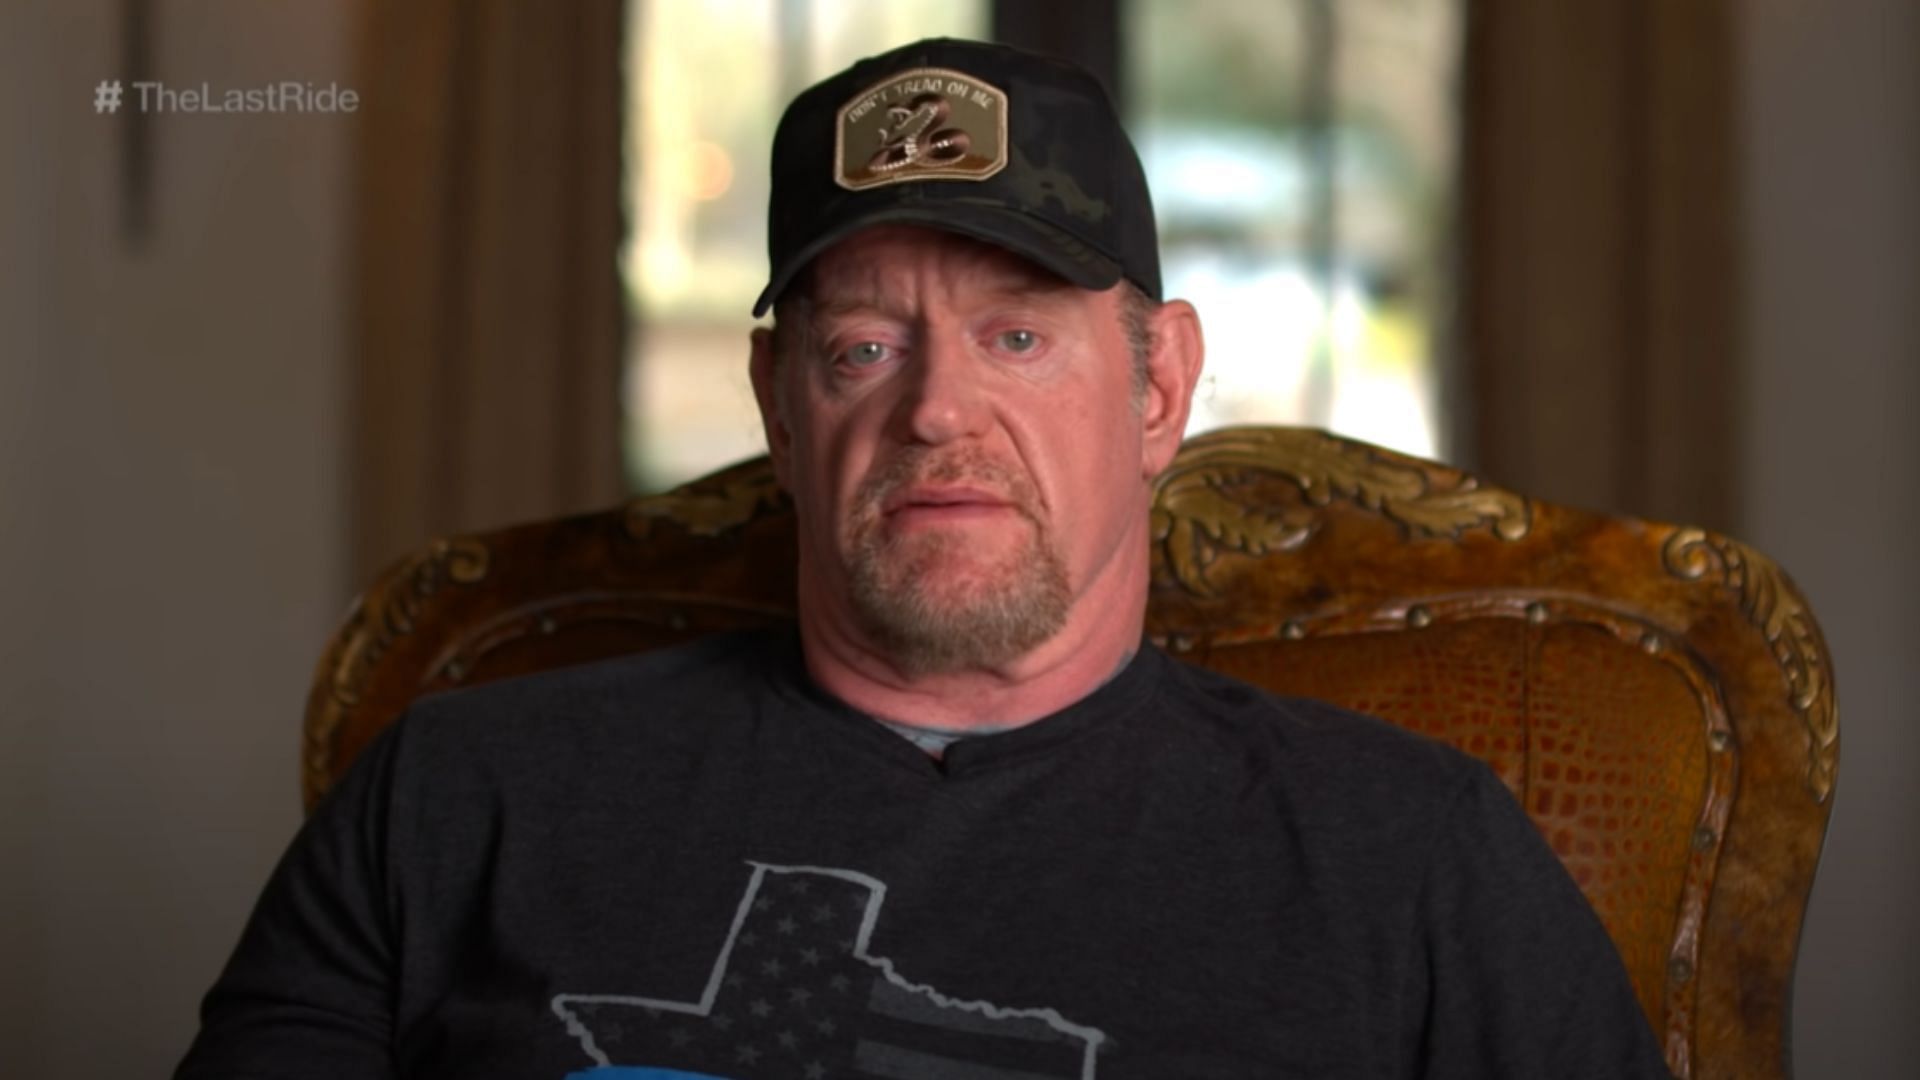 WWE Hall of Famer The Undertaker, real name Mark Calaway